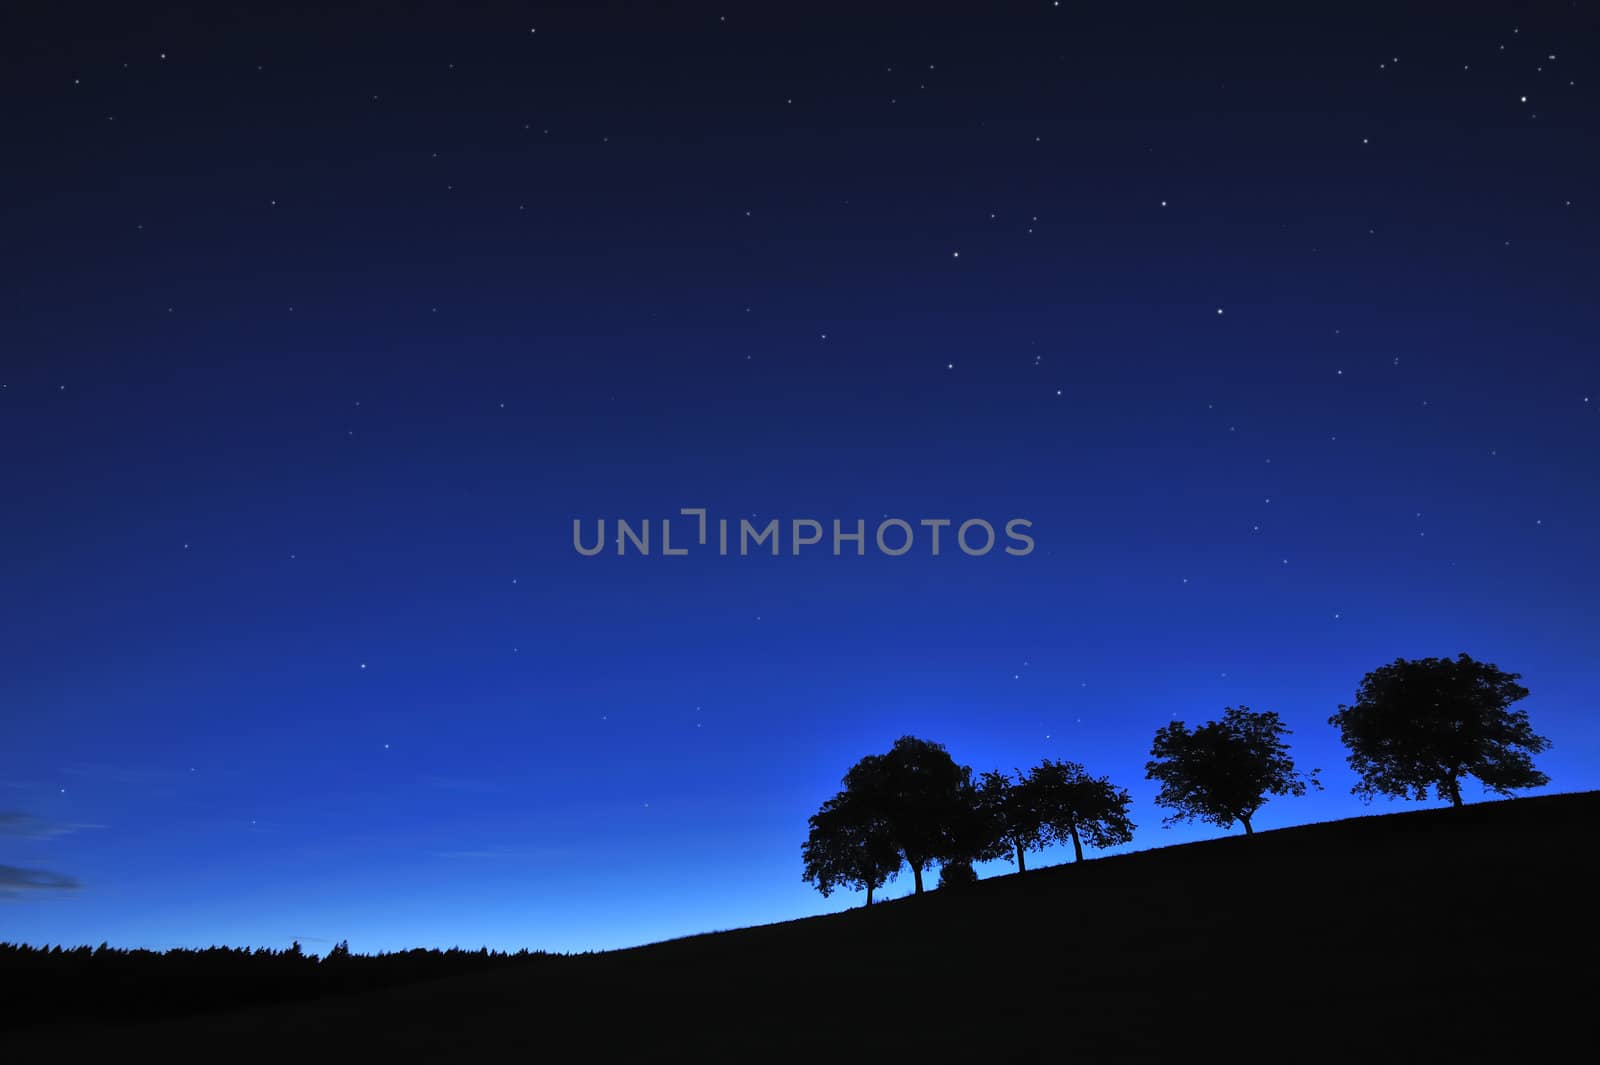 A hillside at dawn, with a line of silhouetted trees under a deep blue, clear starry sky.